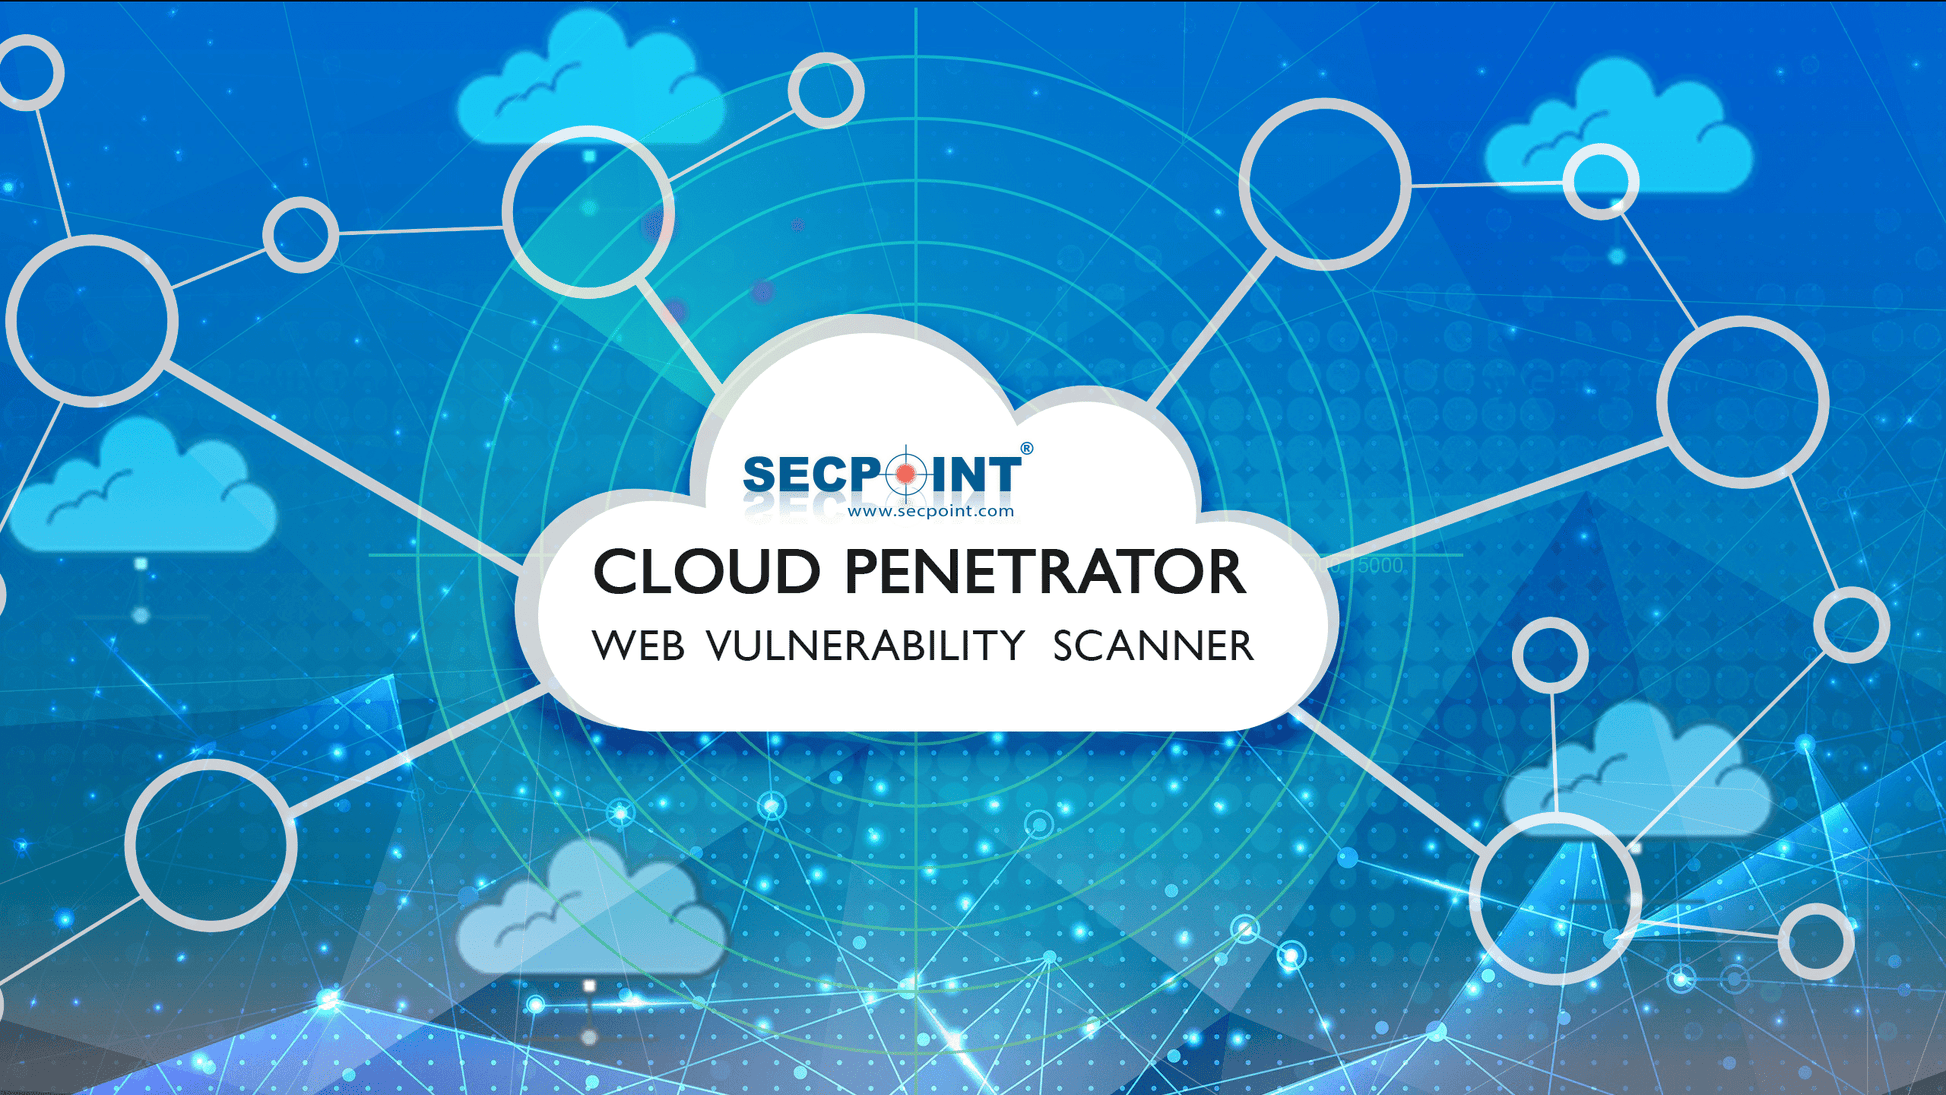 SecPoint Cloud Penetrator S9 - Vulnerability Scanning of 8 IPs for 3 Years Static Scan License - SecPoint